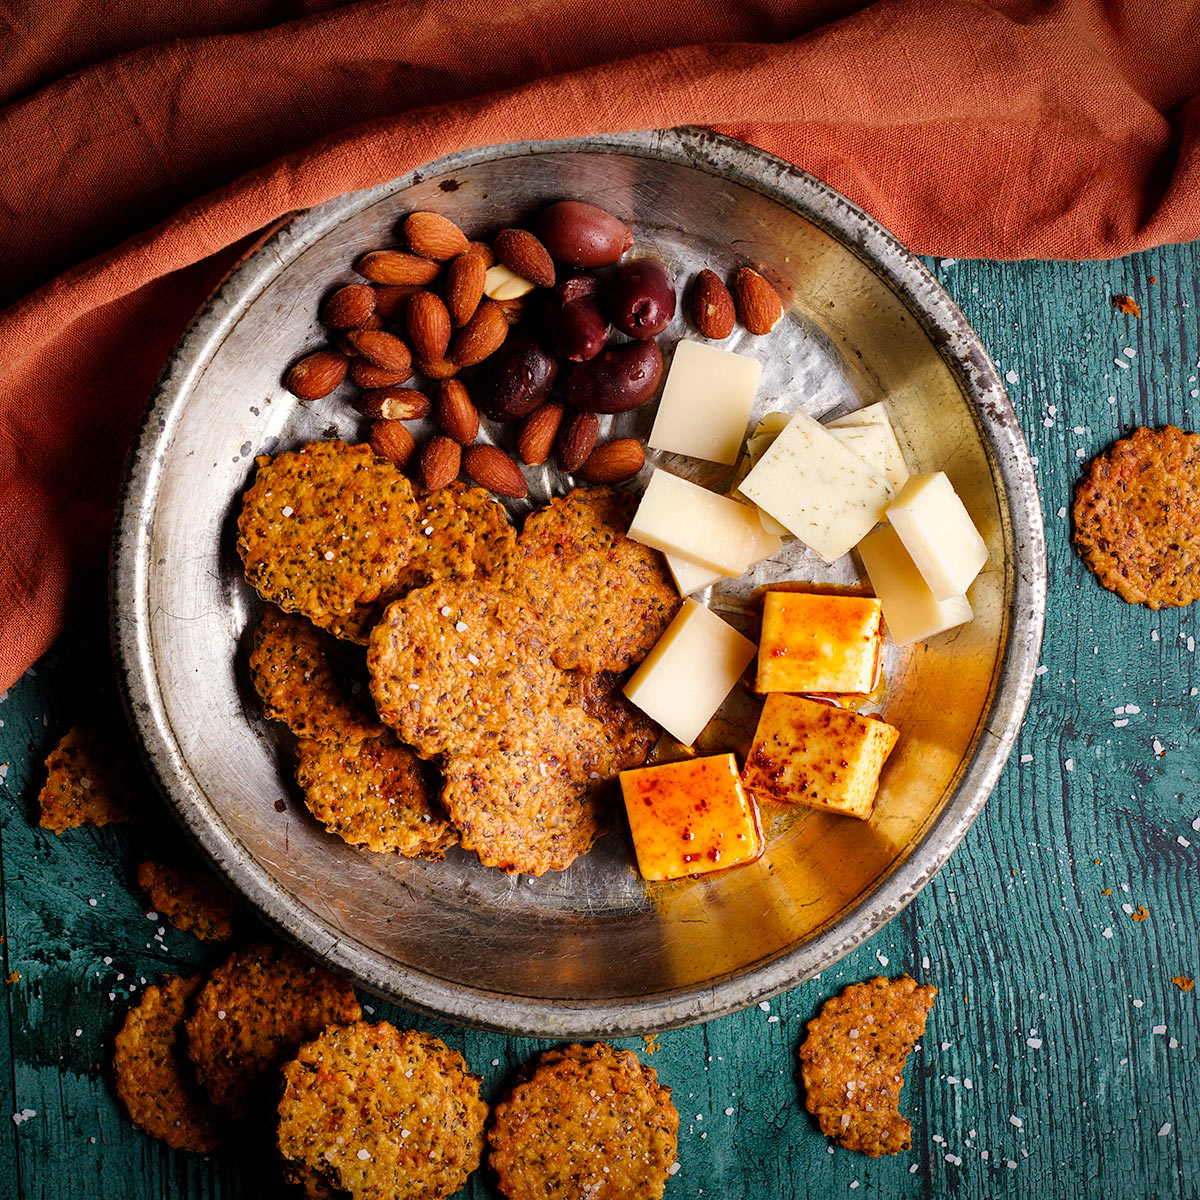 A tin plate filled with homemade crackers, slices of cheese, olives, and almonds.